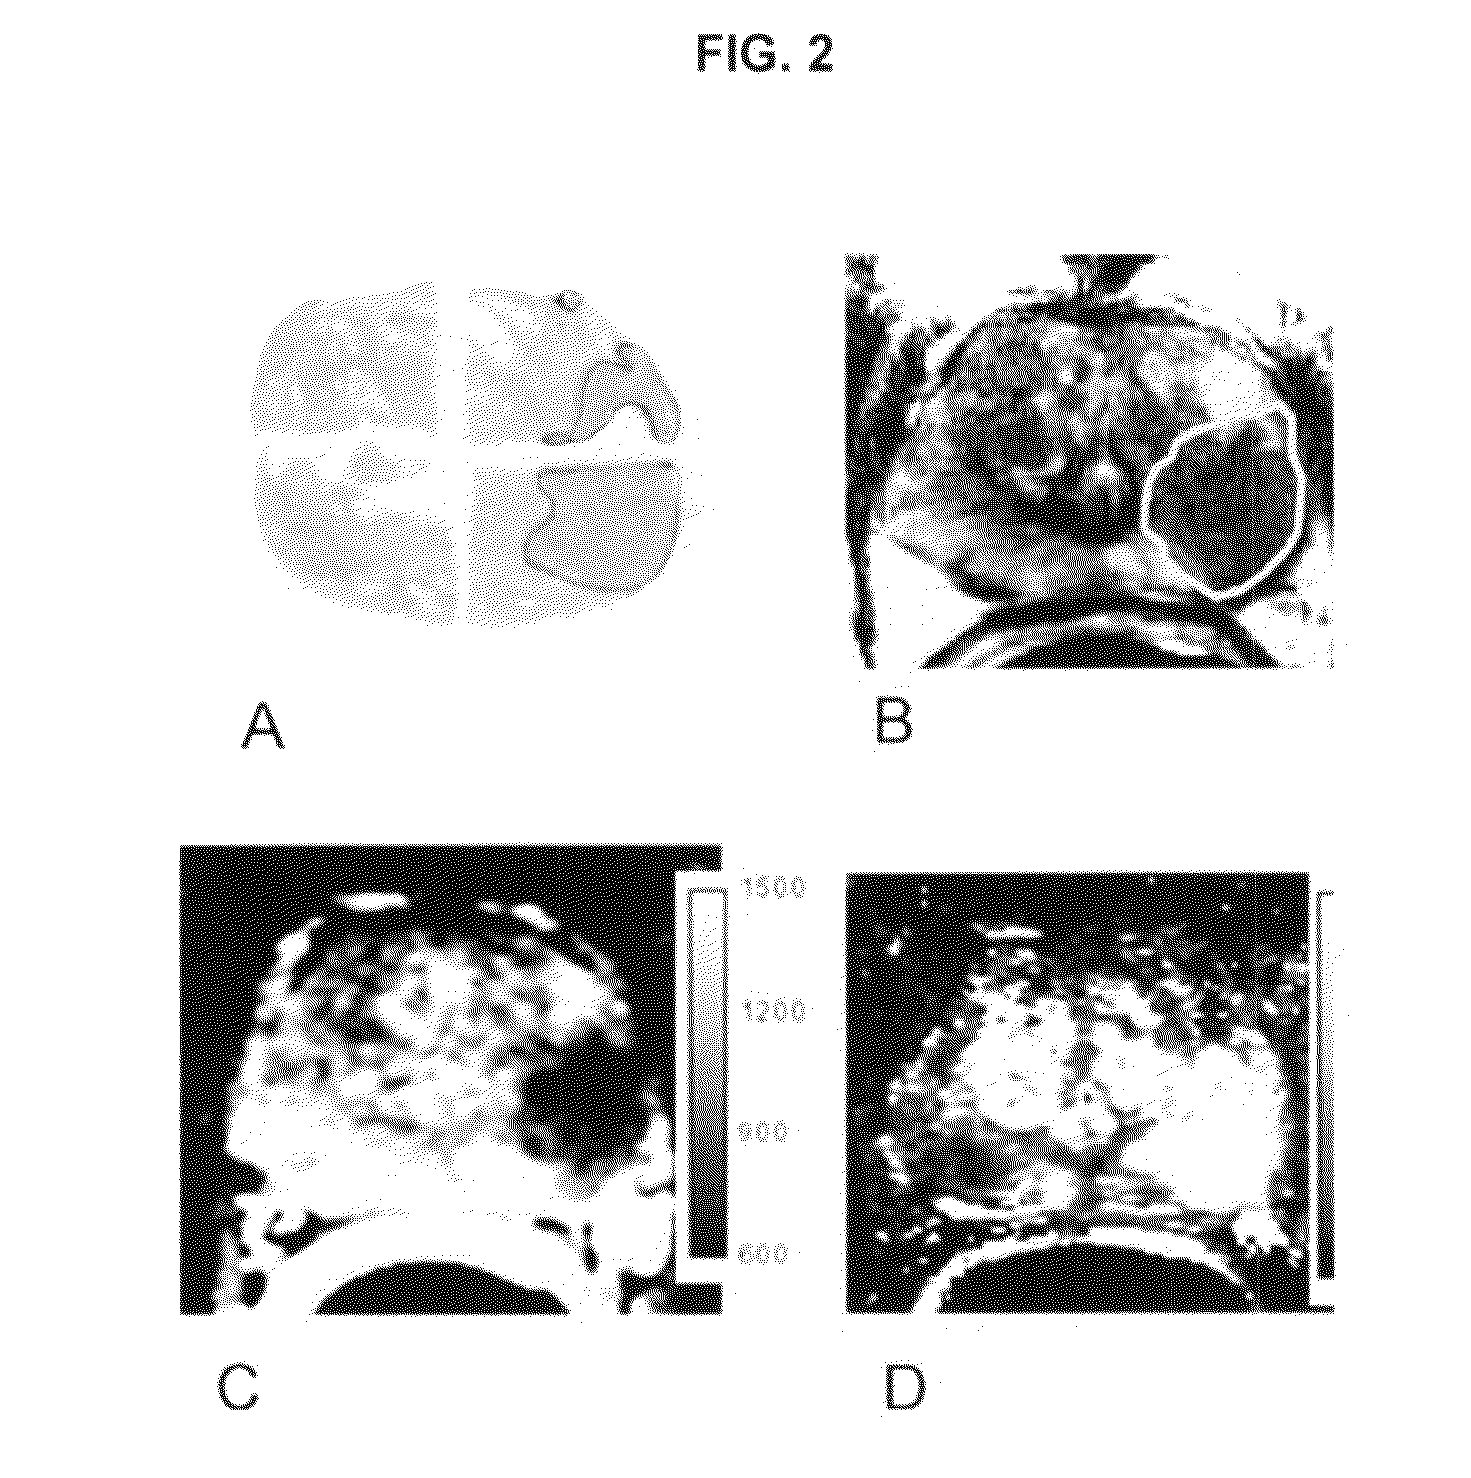 System and method of guided treatment within malignant prostate tissue